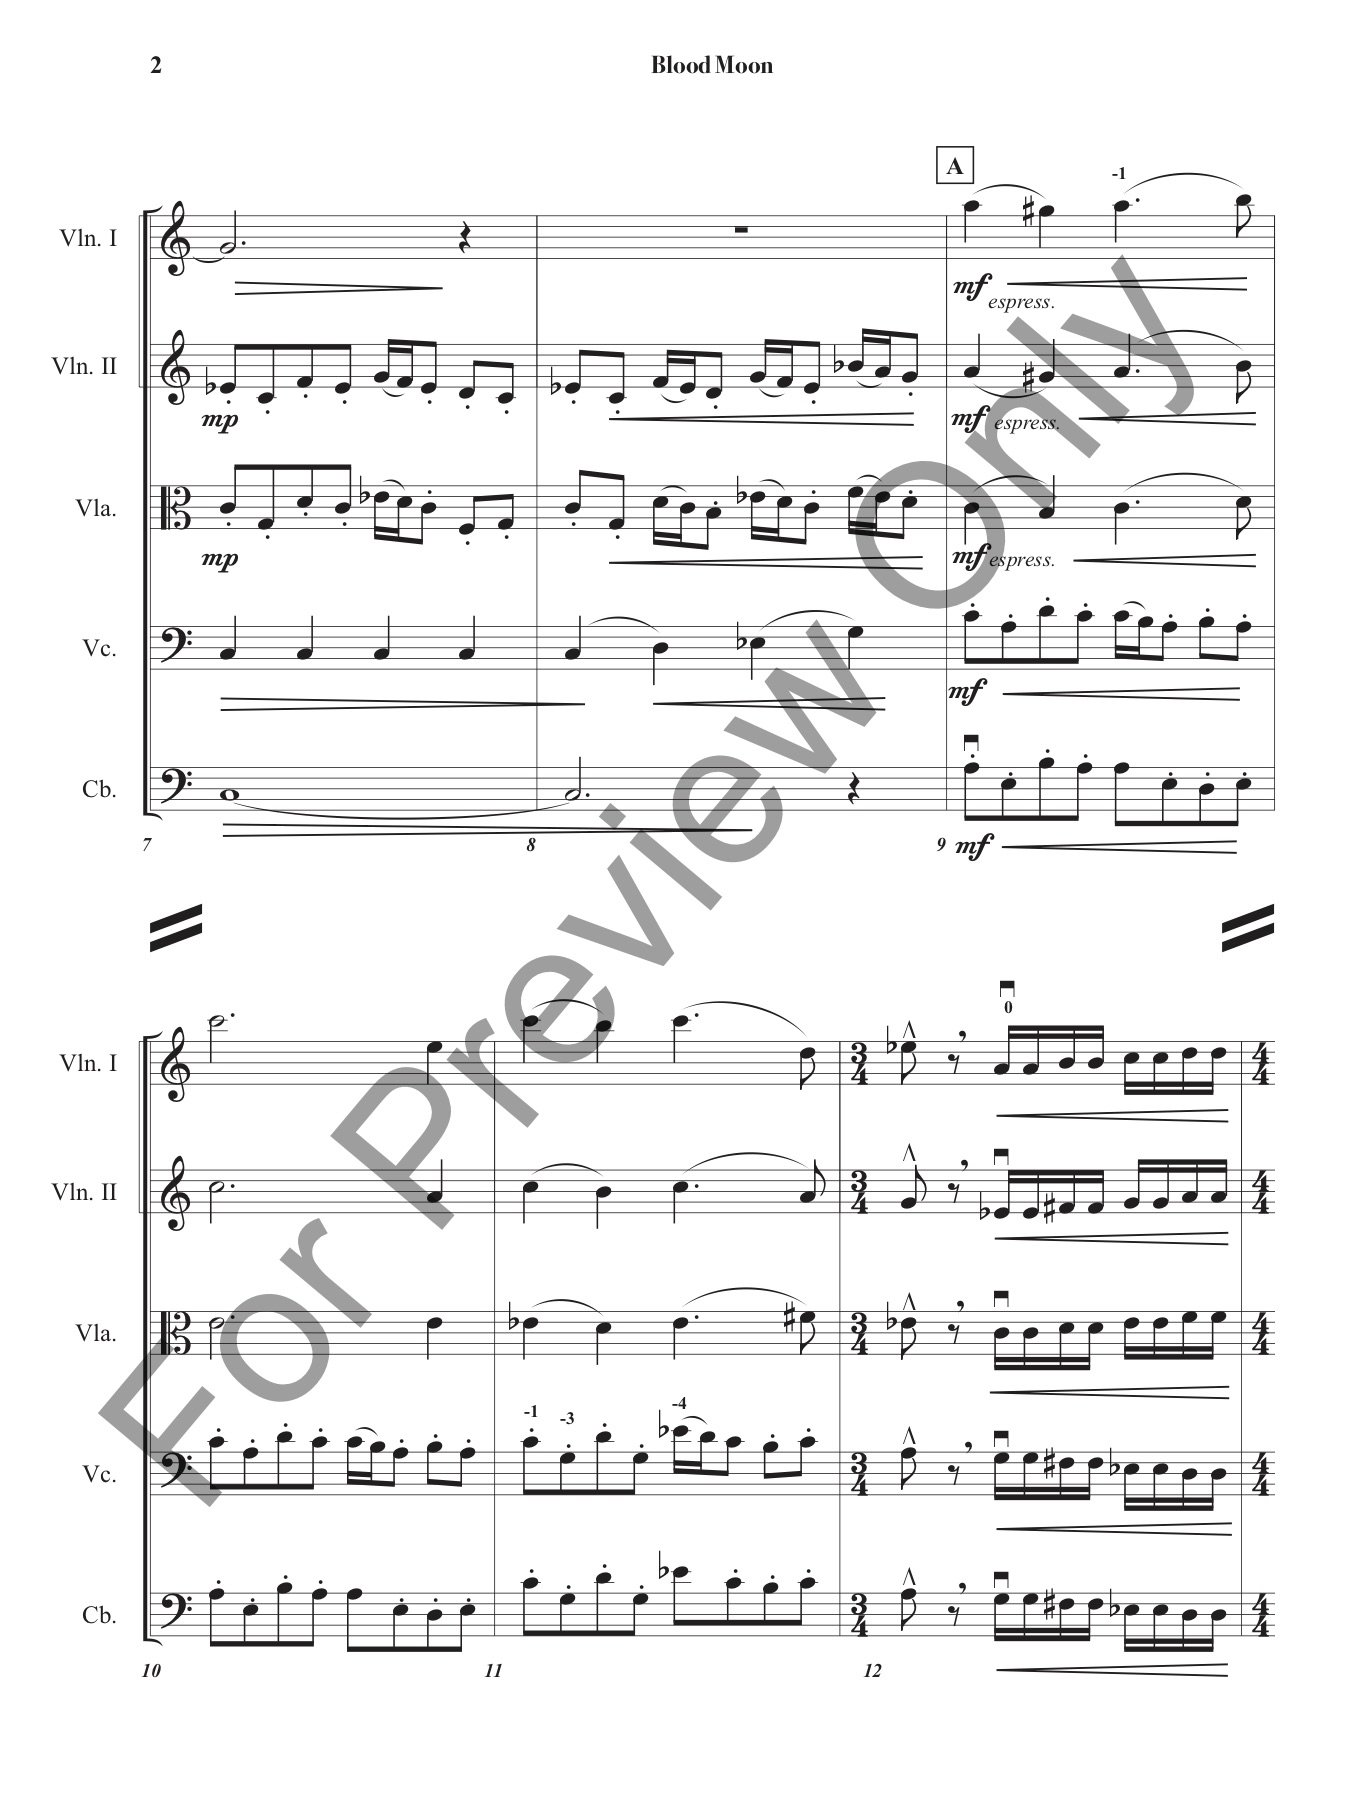 Blood Moon for String Orchestra - Cover Page and Full Score Only (for Preview Only p4).jpg